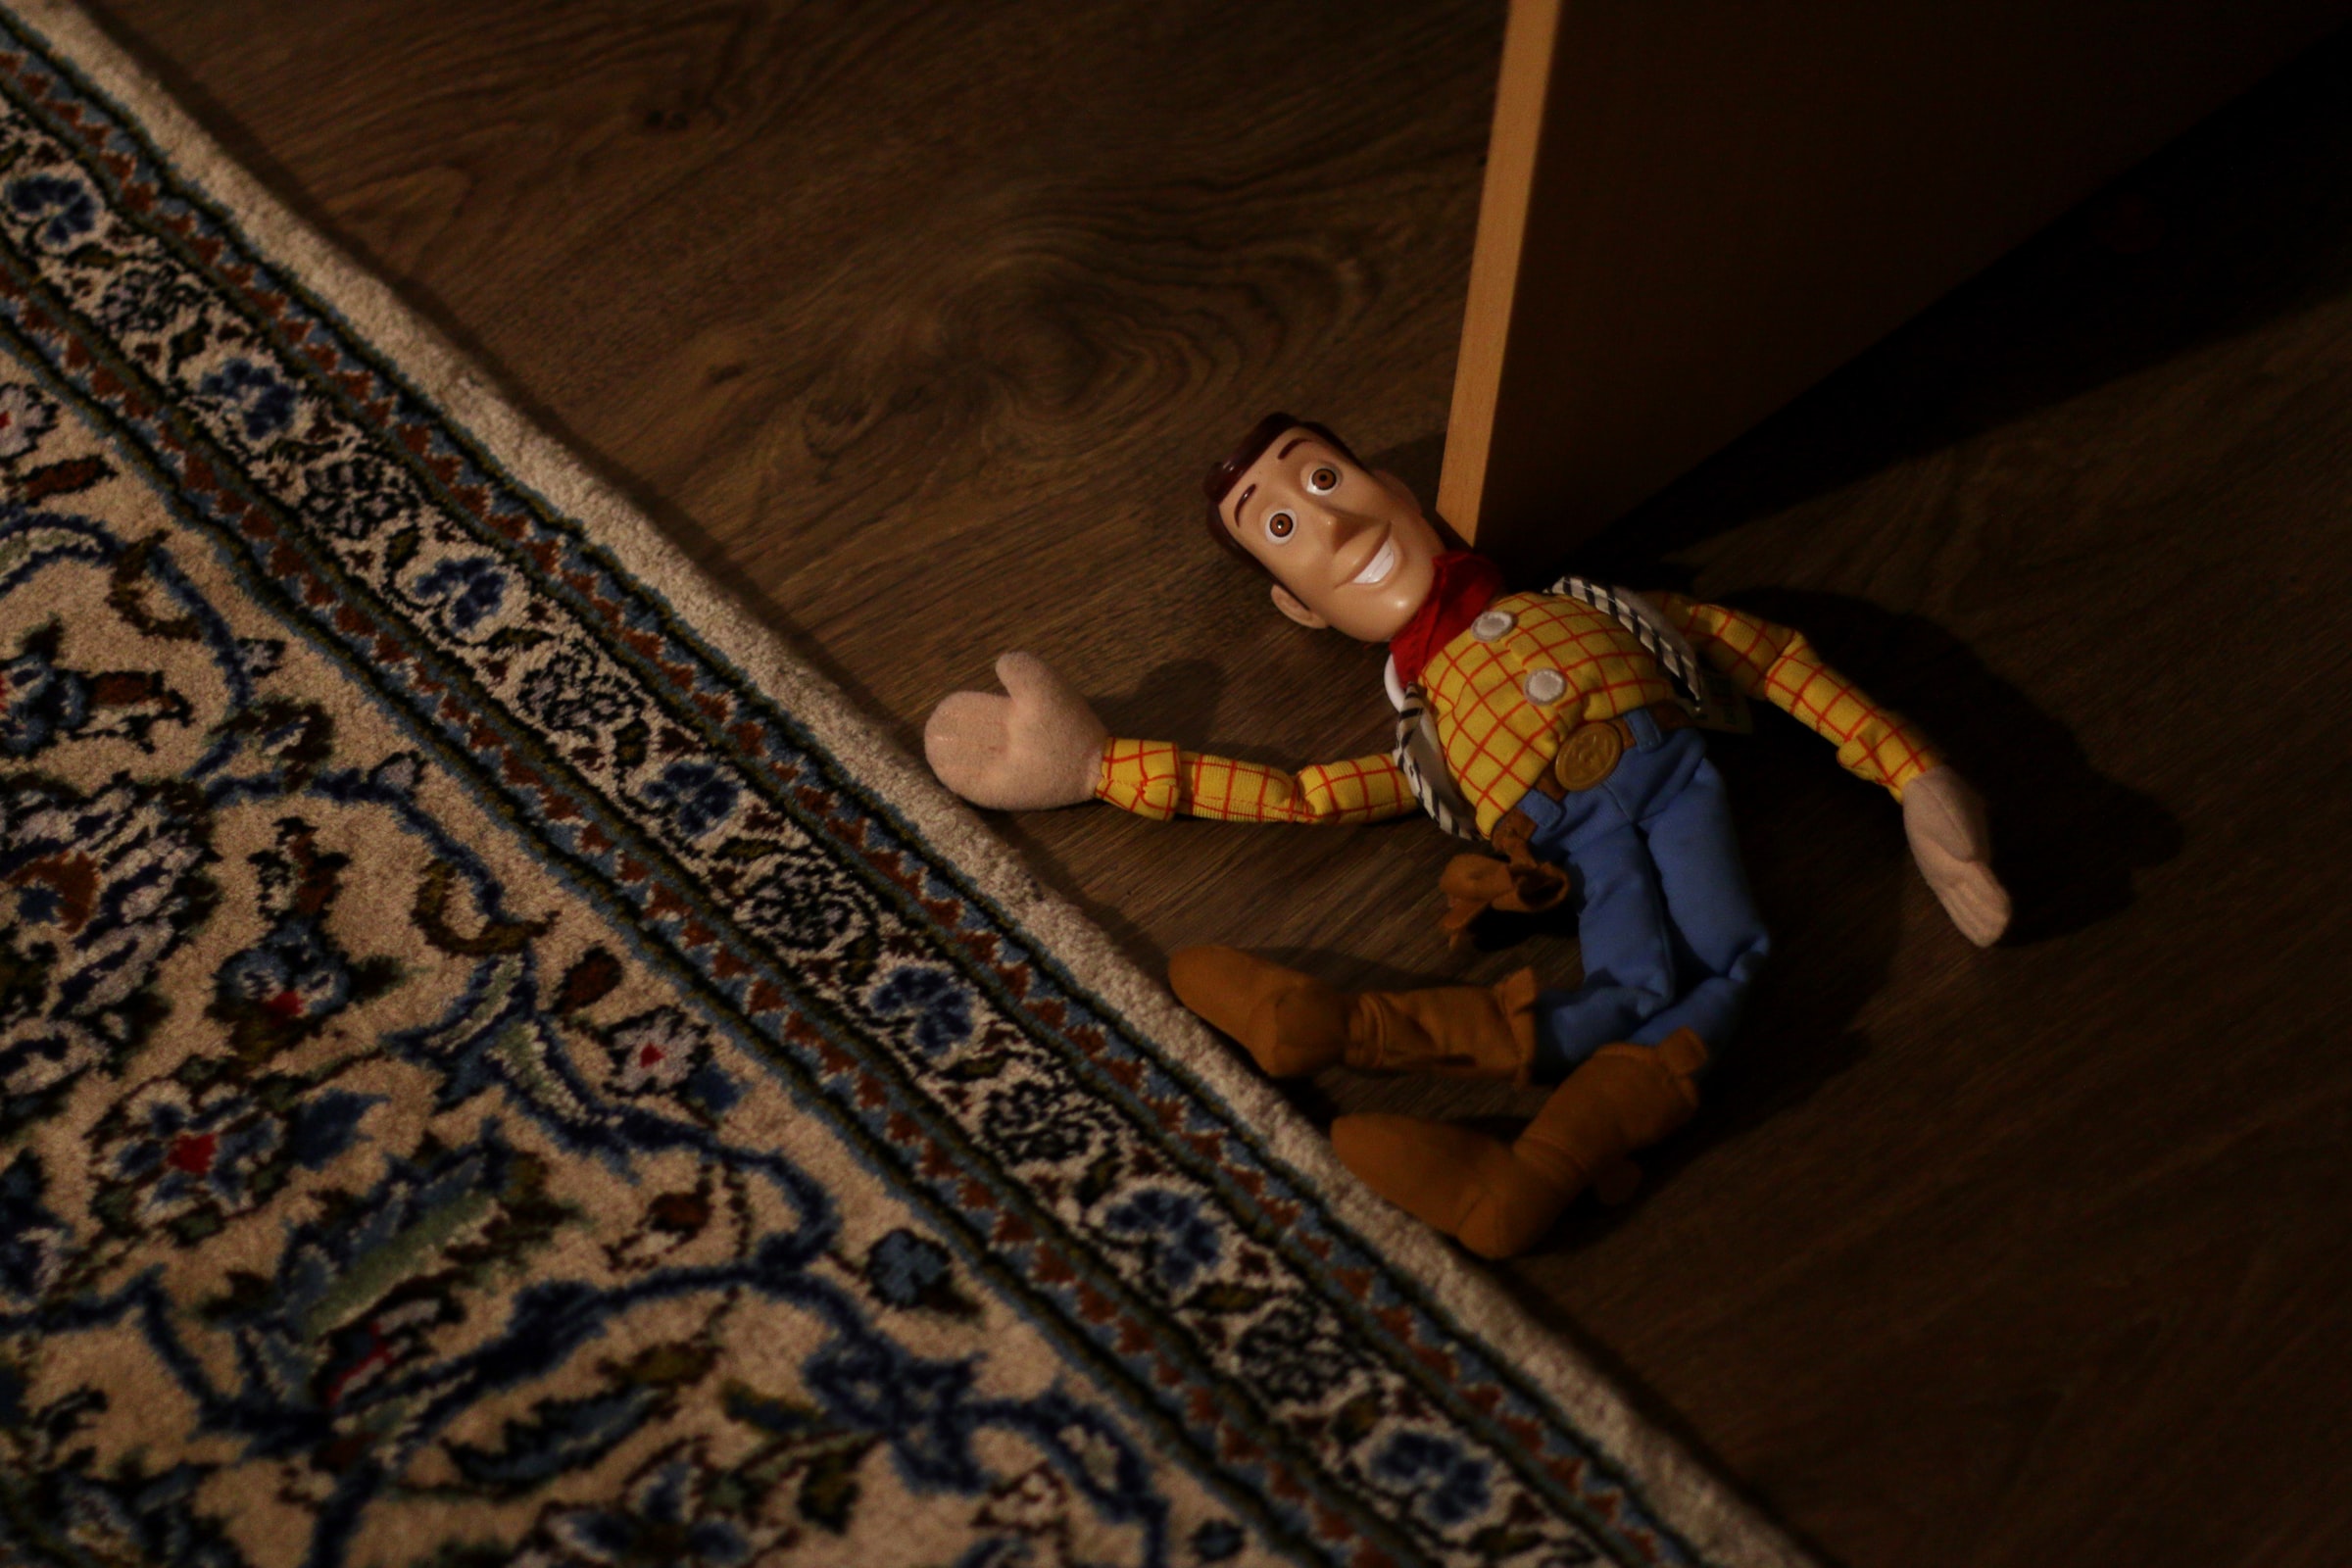 broken Woody toy; product liability insurance